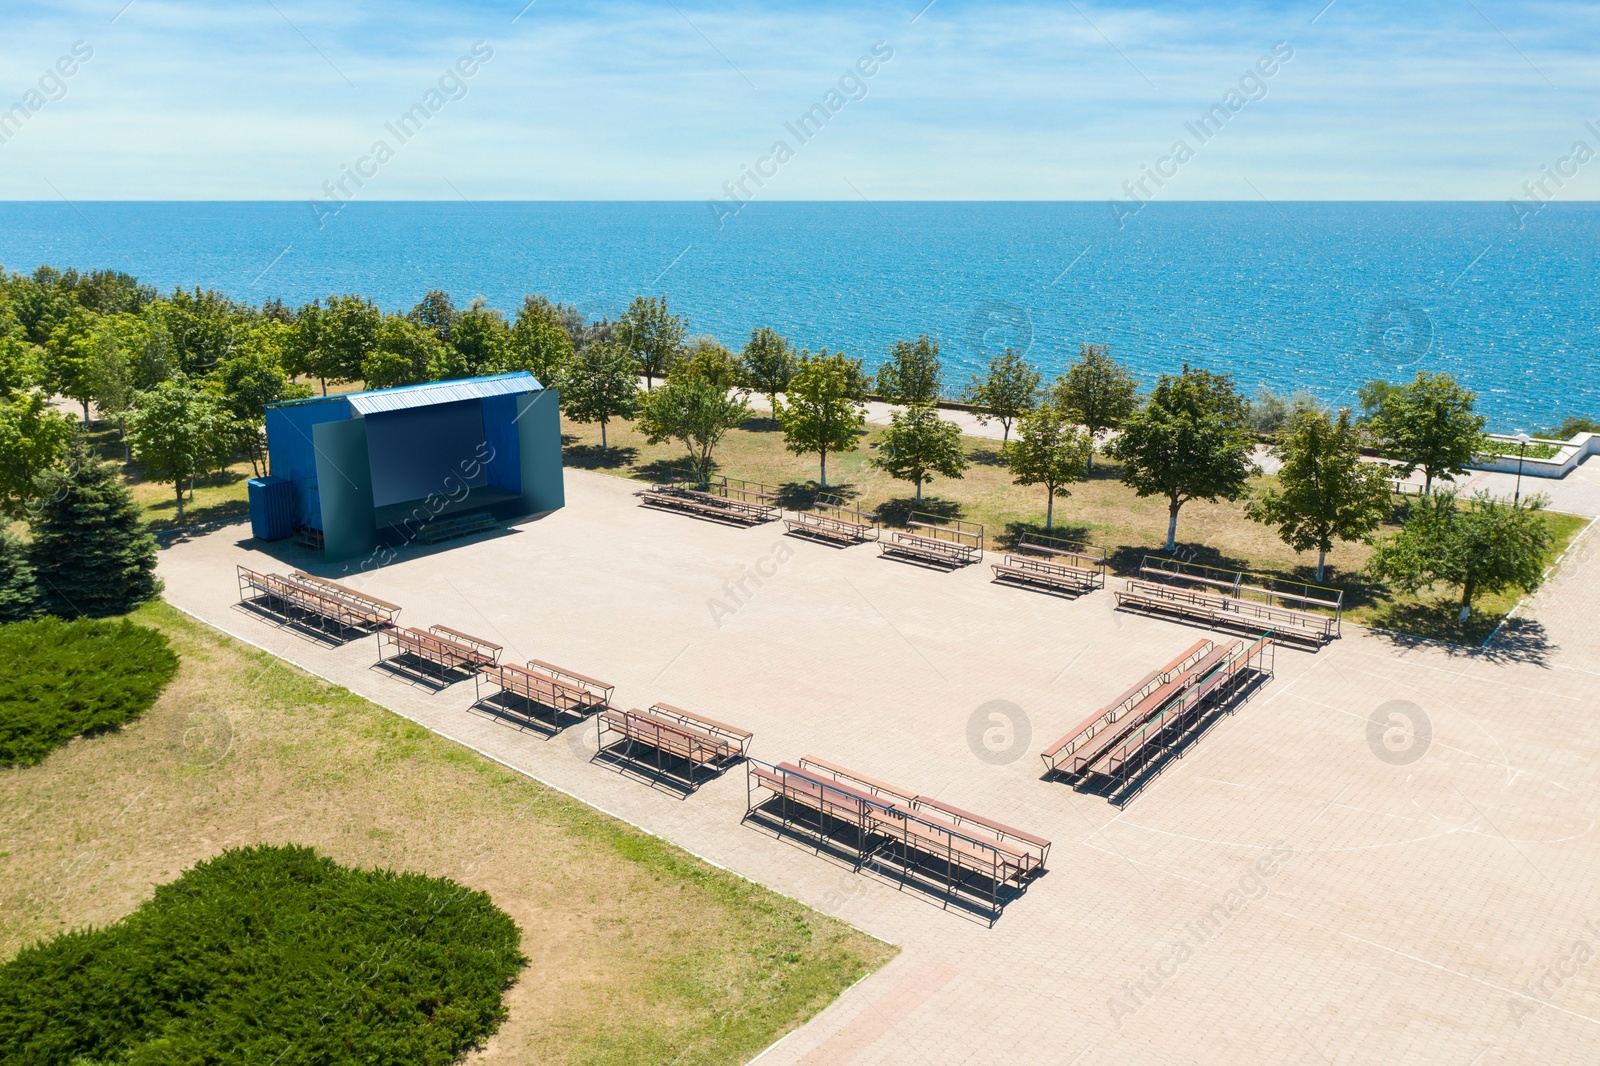 Image of Outdoor cinema and entertainment place near sea on sunny day 